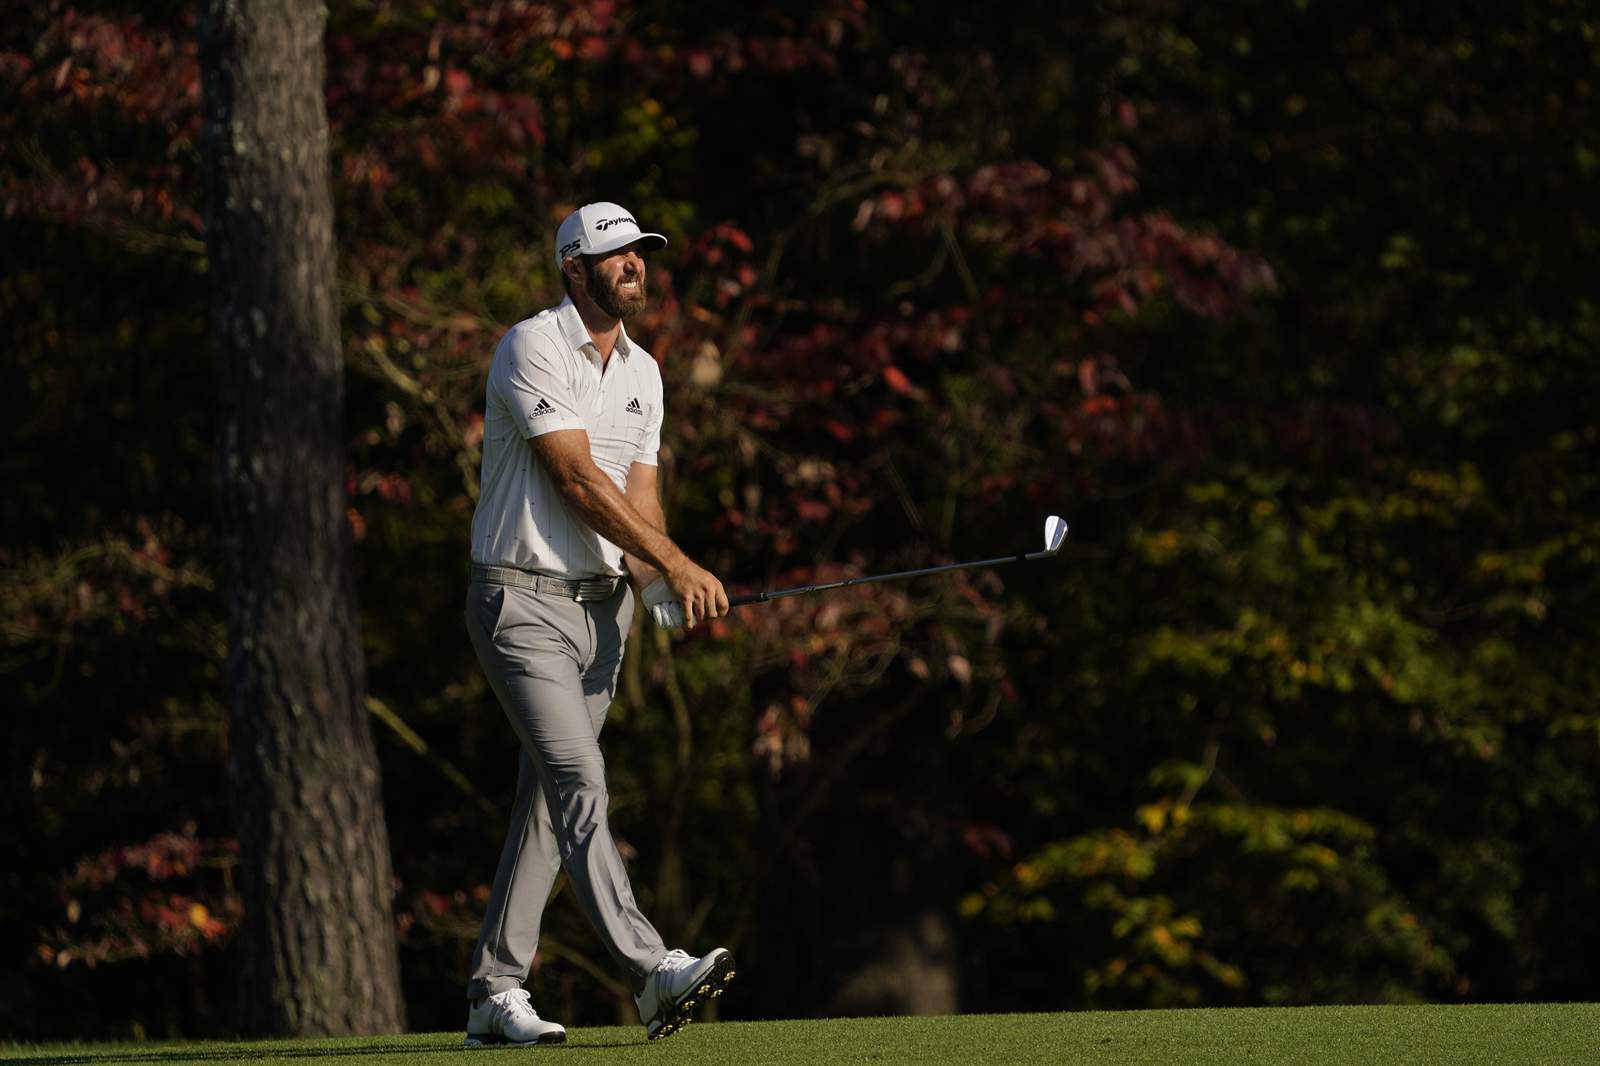 Johnson plays like No. 1 and seizes control at the Masters